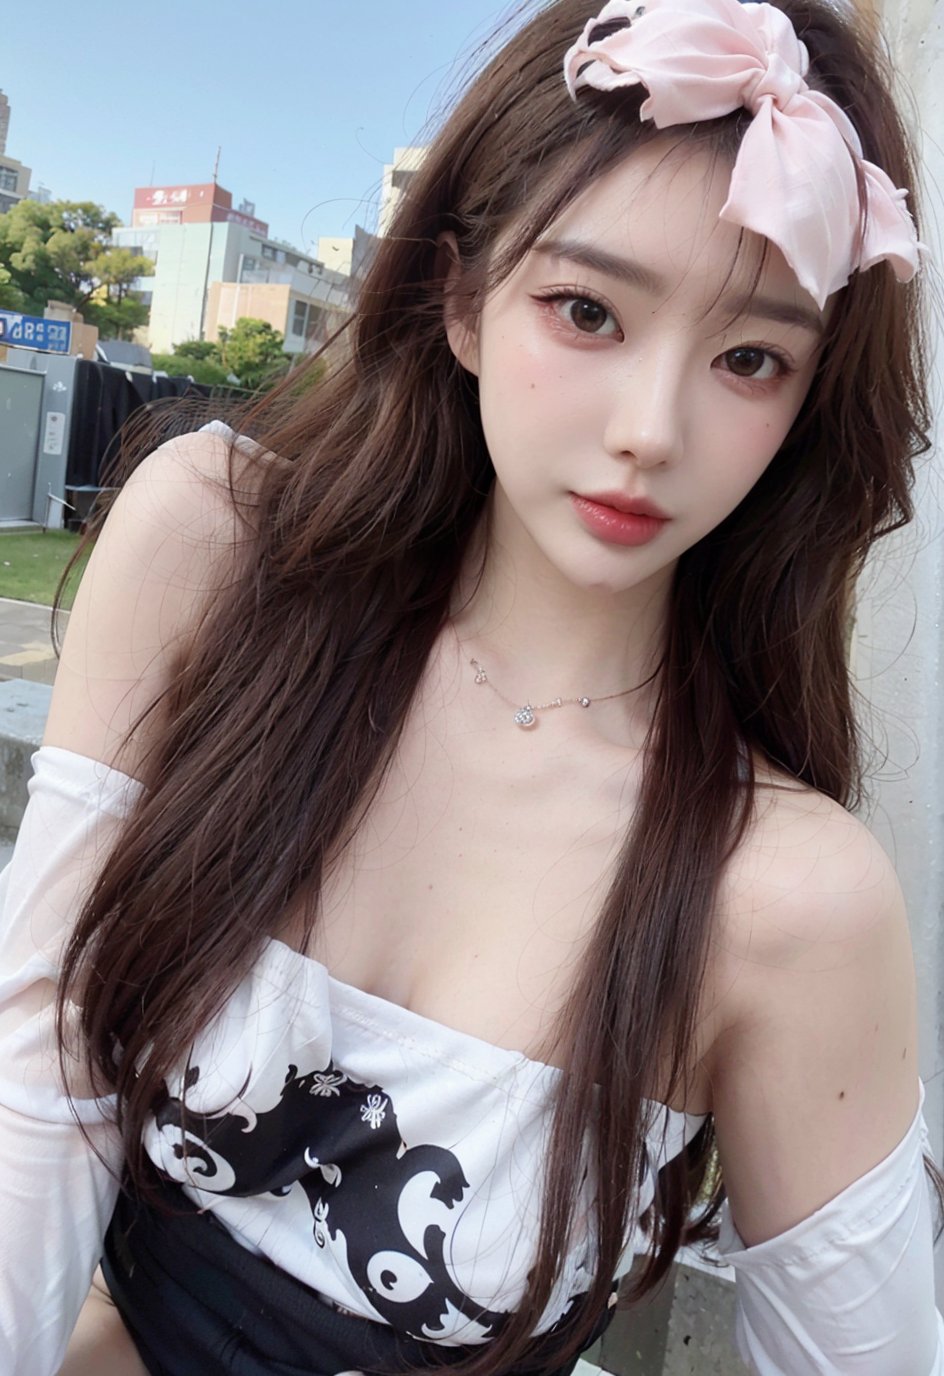 (Korean women), middle-aged women are tall and have enviable breasts. She has long, wavy brown hair, and her hair looks shiny and healthy,1girl,{{{{{full-body}}}}},(Full body),(Single photo),(Front view),1 girl, In the photo taken with a high-definition camera, she appears in a long shot. Her skin maintains a smooth and even skin tone with a white skin tone. ((Looking at viewer)), Casual, ((Cream long-sleeved compression offshoulder tee, jean shorts: 1.3)), Standing with legs apart, She is depicted in various poses while wearing luxurious jewellery. Her eyes are bright and vibrant, and her smiling face shows happiness and confidence. The appearance of the middle-aged woman depicted in this way is realistic and detailed, with beauty and elegance emphasized.,

Jessy, Jessy, 1 girl, smile, detailed face, a woman with long black hair ,(((bright_pink_dress:1.5))), hands_and_knees, all-fours, face_down_ass_up, 
 (beautiful_detailed_light), outdoor scene, (night light),  led lighting, magnificent light, body portrait, RAW, (intricate details:1.3), (best quality:1.3), (masterpiece:1.3), (hyper realistic:1.3), best quality, 1 girl, ultra-detailed, ultra high resolution, very detailed mphysically based rendering, dynamic angle, dynamic pose, wind, 8K UHD, Vivid picture, High definition, intricate details, detailed texture, finely detailed, high detail, extremely detailed cg, High quality shadow, a realistic representation of the face, beautiful detailed, (high detailed skin, skin details), slim waist, beautiful and realistic and detailed hands and fingers:1, best ratio four finger and one thumb, (detailed face, detailed eyes, beautiful face), ((korean beauty, kpop idol, ulzzang, korean celebrity, korean cute, korean actress, korean, a beautiful 18 years old beautiful korean girl)), (high detailed skin, skin details), Detailed beautiful delicate face, Detailed beautiful delicate eyes, a face of perfect proportion, (beautiful and realistic and detailed hands and fingers:1.3), (Big breasts:1.3), (full body shot:1.3), (long legs:1.3), (sparkling eyes:1.3), (sparkling lips:1.3), taken by Canon EOS, SIGMA Art Lens 35mm F1.4, ISO 200 Shutter Speed 2000, Vivid ((korean beauty, kpop idol, ulzzang, korean celebrity, korean cute, korean actress, korean, 인스타 여신:1.3, a beautiful 18 years old beautiful korean girl)), (blue eye), (black long hair),chanel_jewelry, chanel_bag, vancleef_necklace,hourglass bodyshape ,Sara, looking_at_viewer,